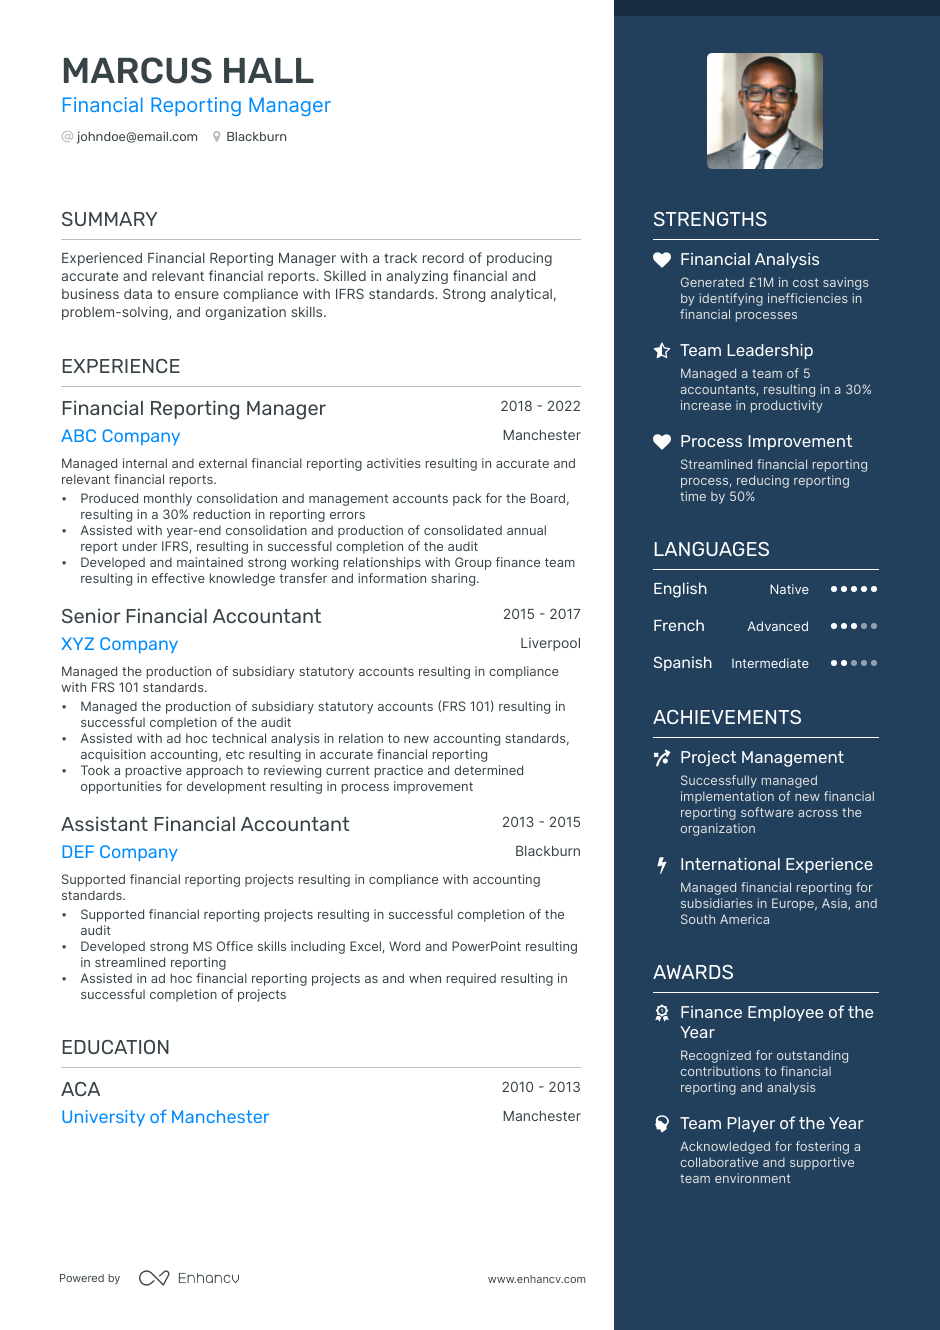 Financial Reporting Manager resume example